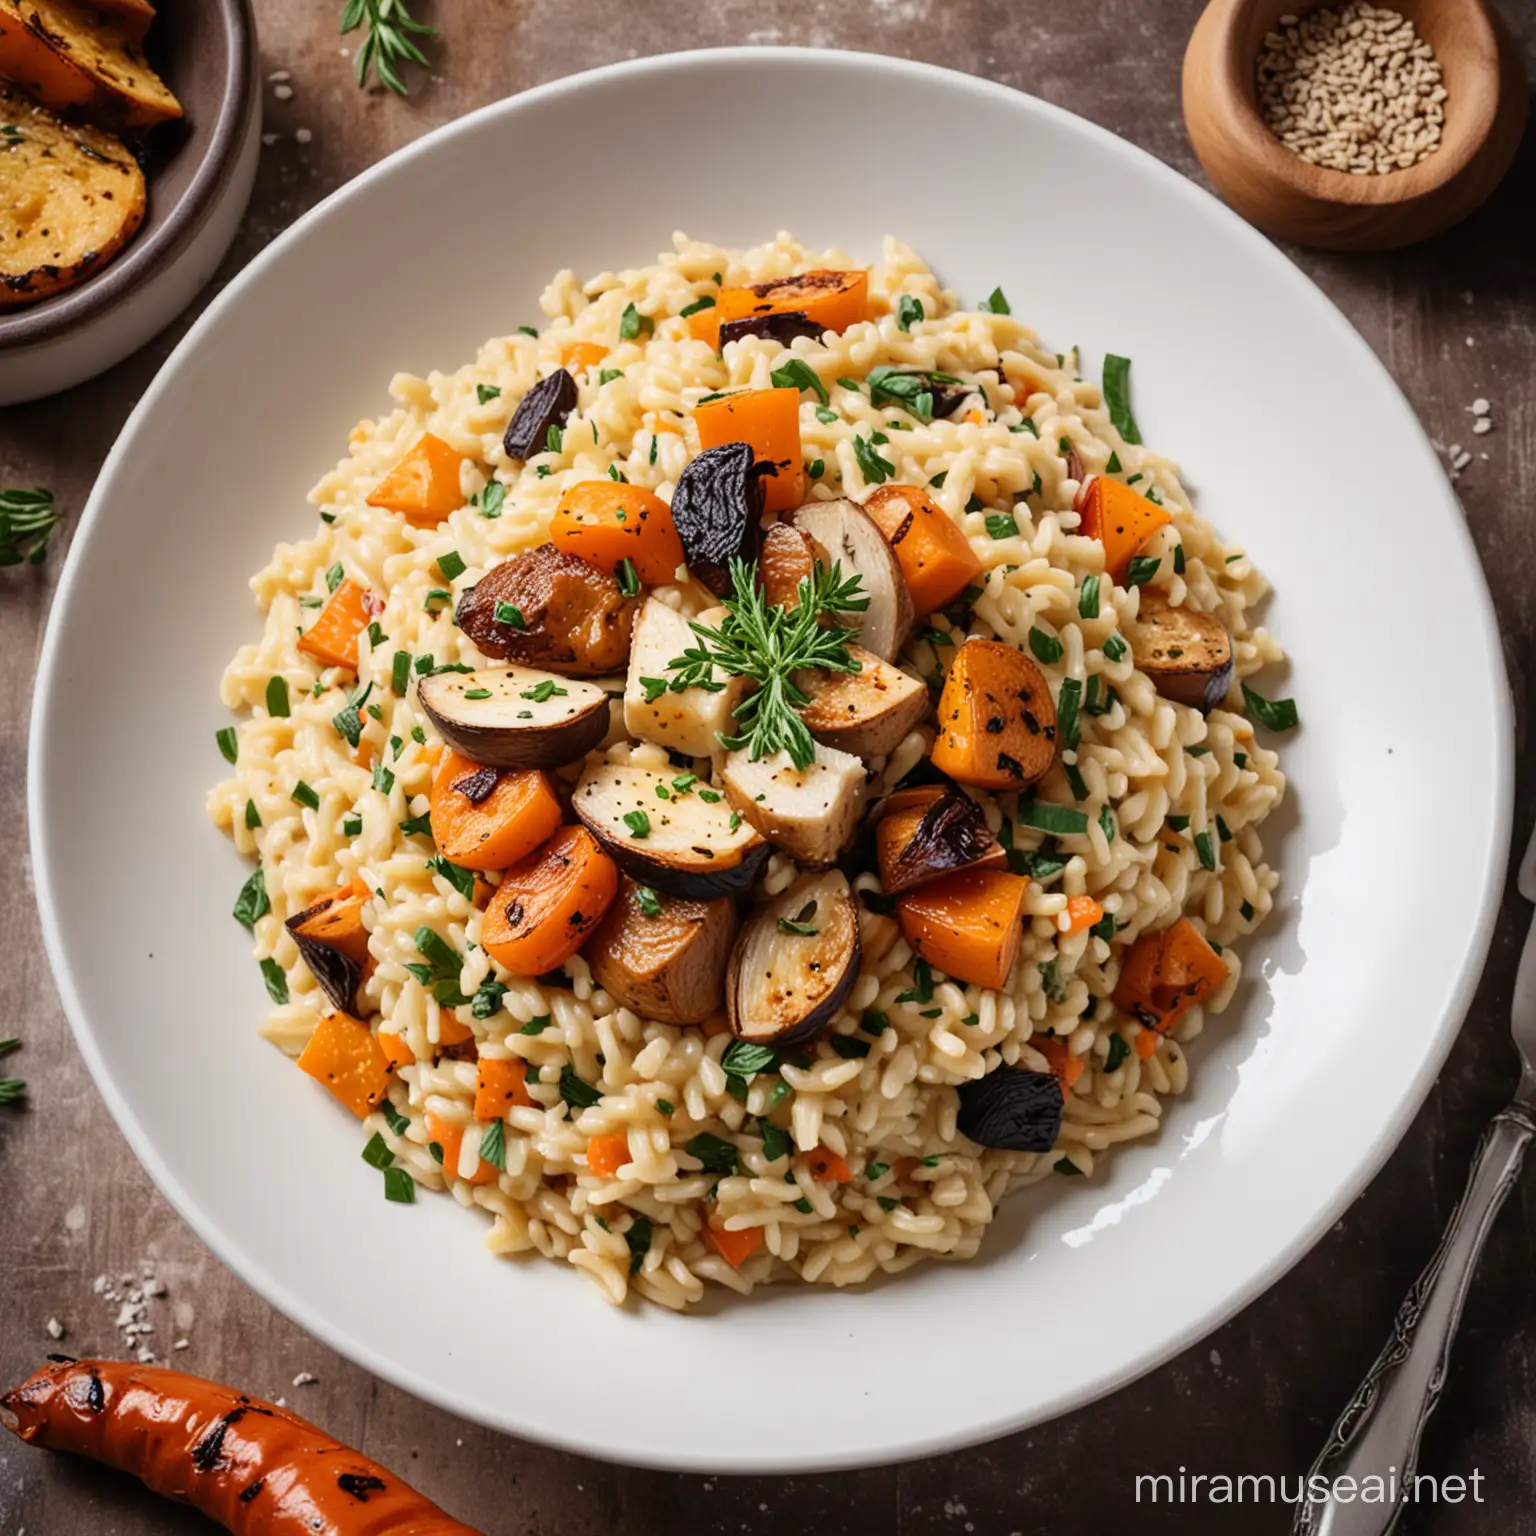 Delicious Risotto with Roasted Vegetables Gourmet Italian Cuisine Image